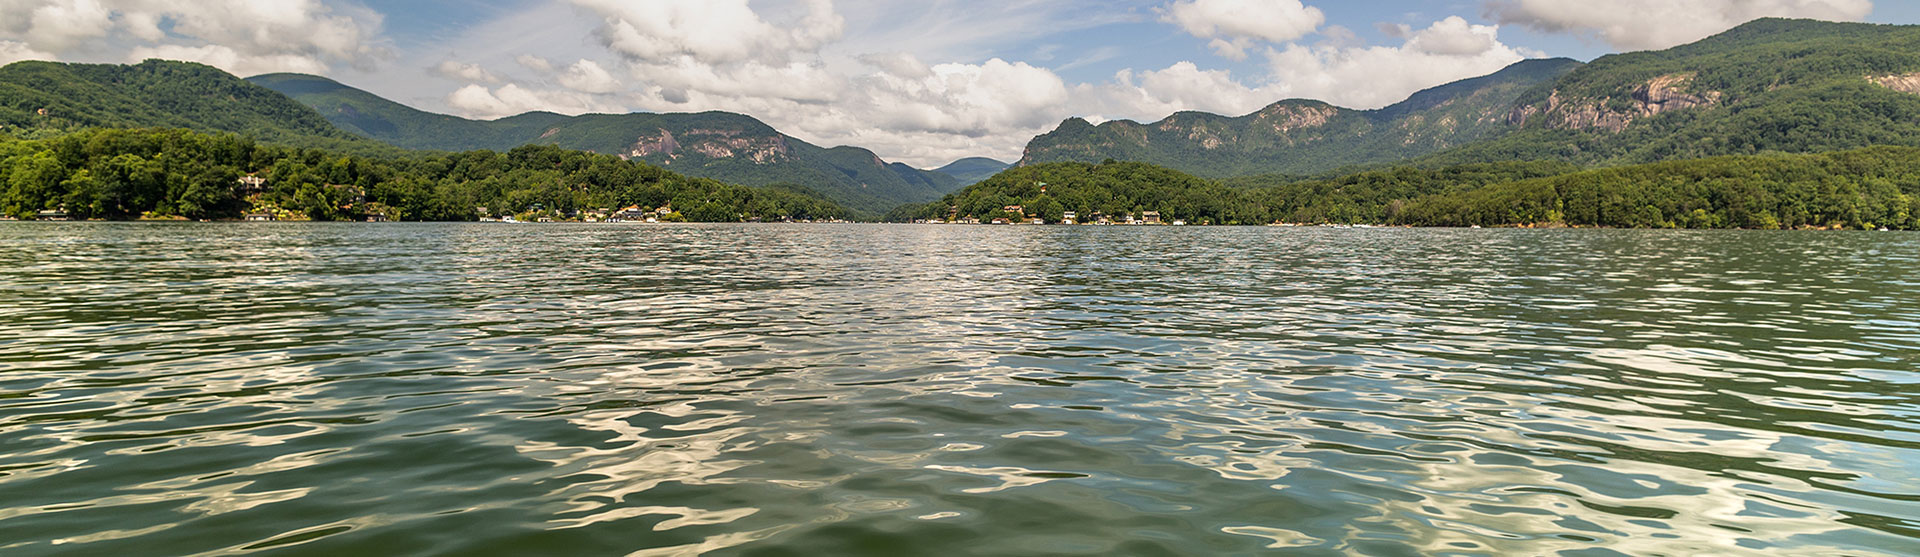 With the guidance of an expert realtor like Dwain Ammons, from Allen Tate | Beverly Hanks Realtors, the dream of owning a piece of Lake Lure's paradise becomes not only feasible but an enriching experience.